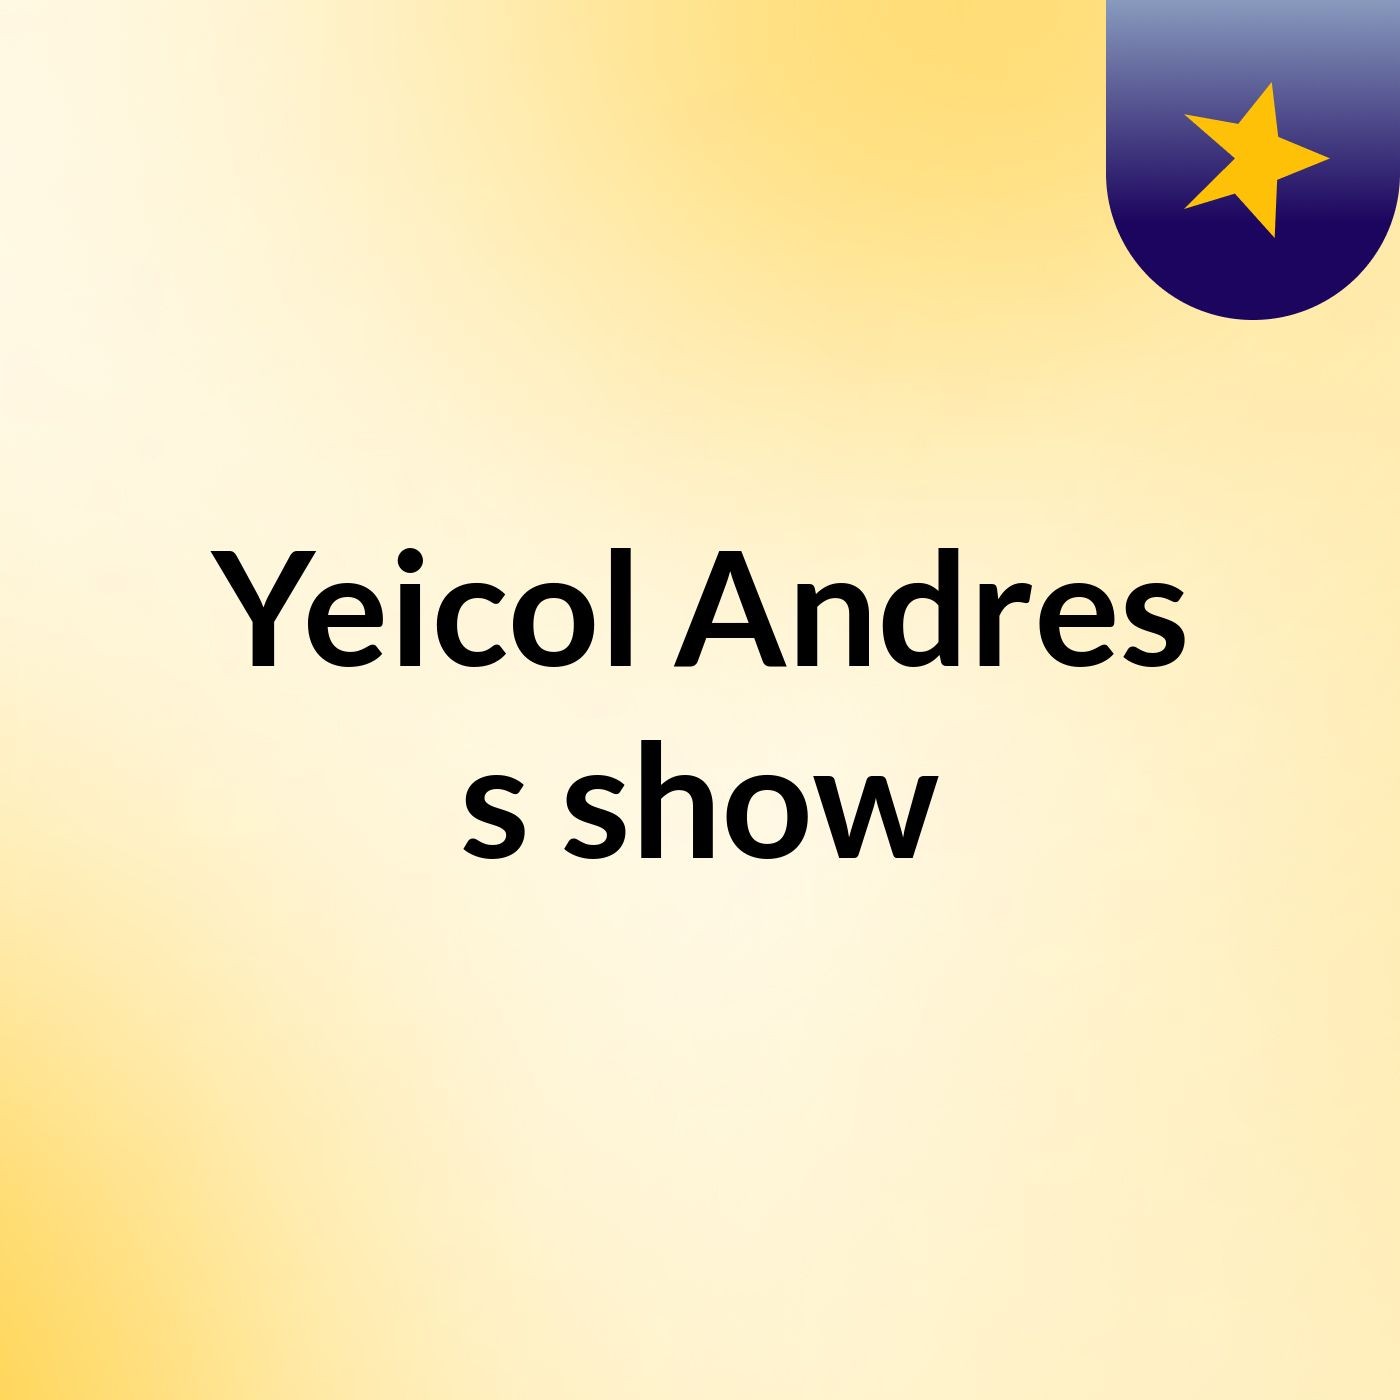 Yeicol Andres's show